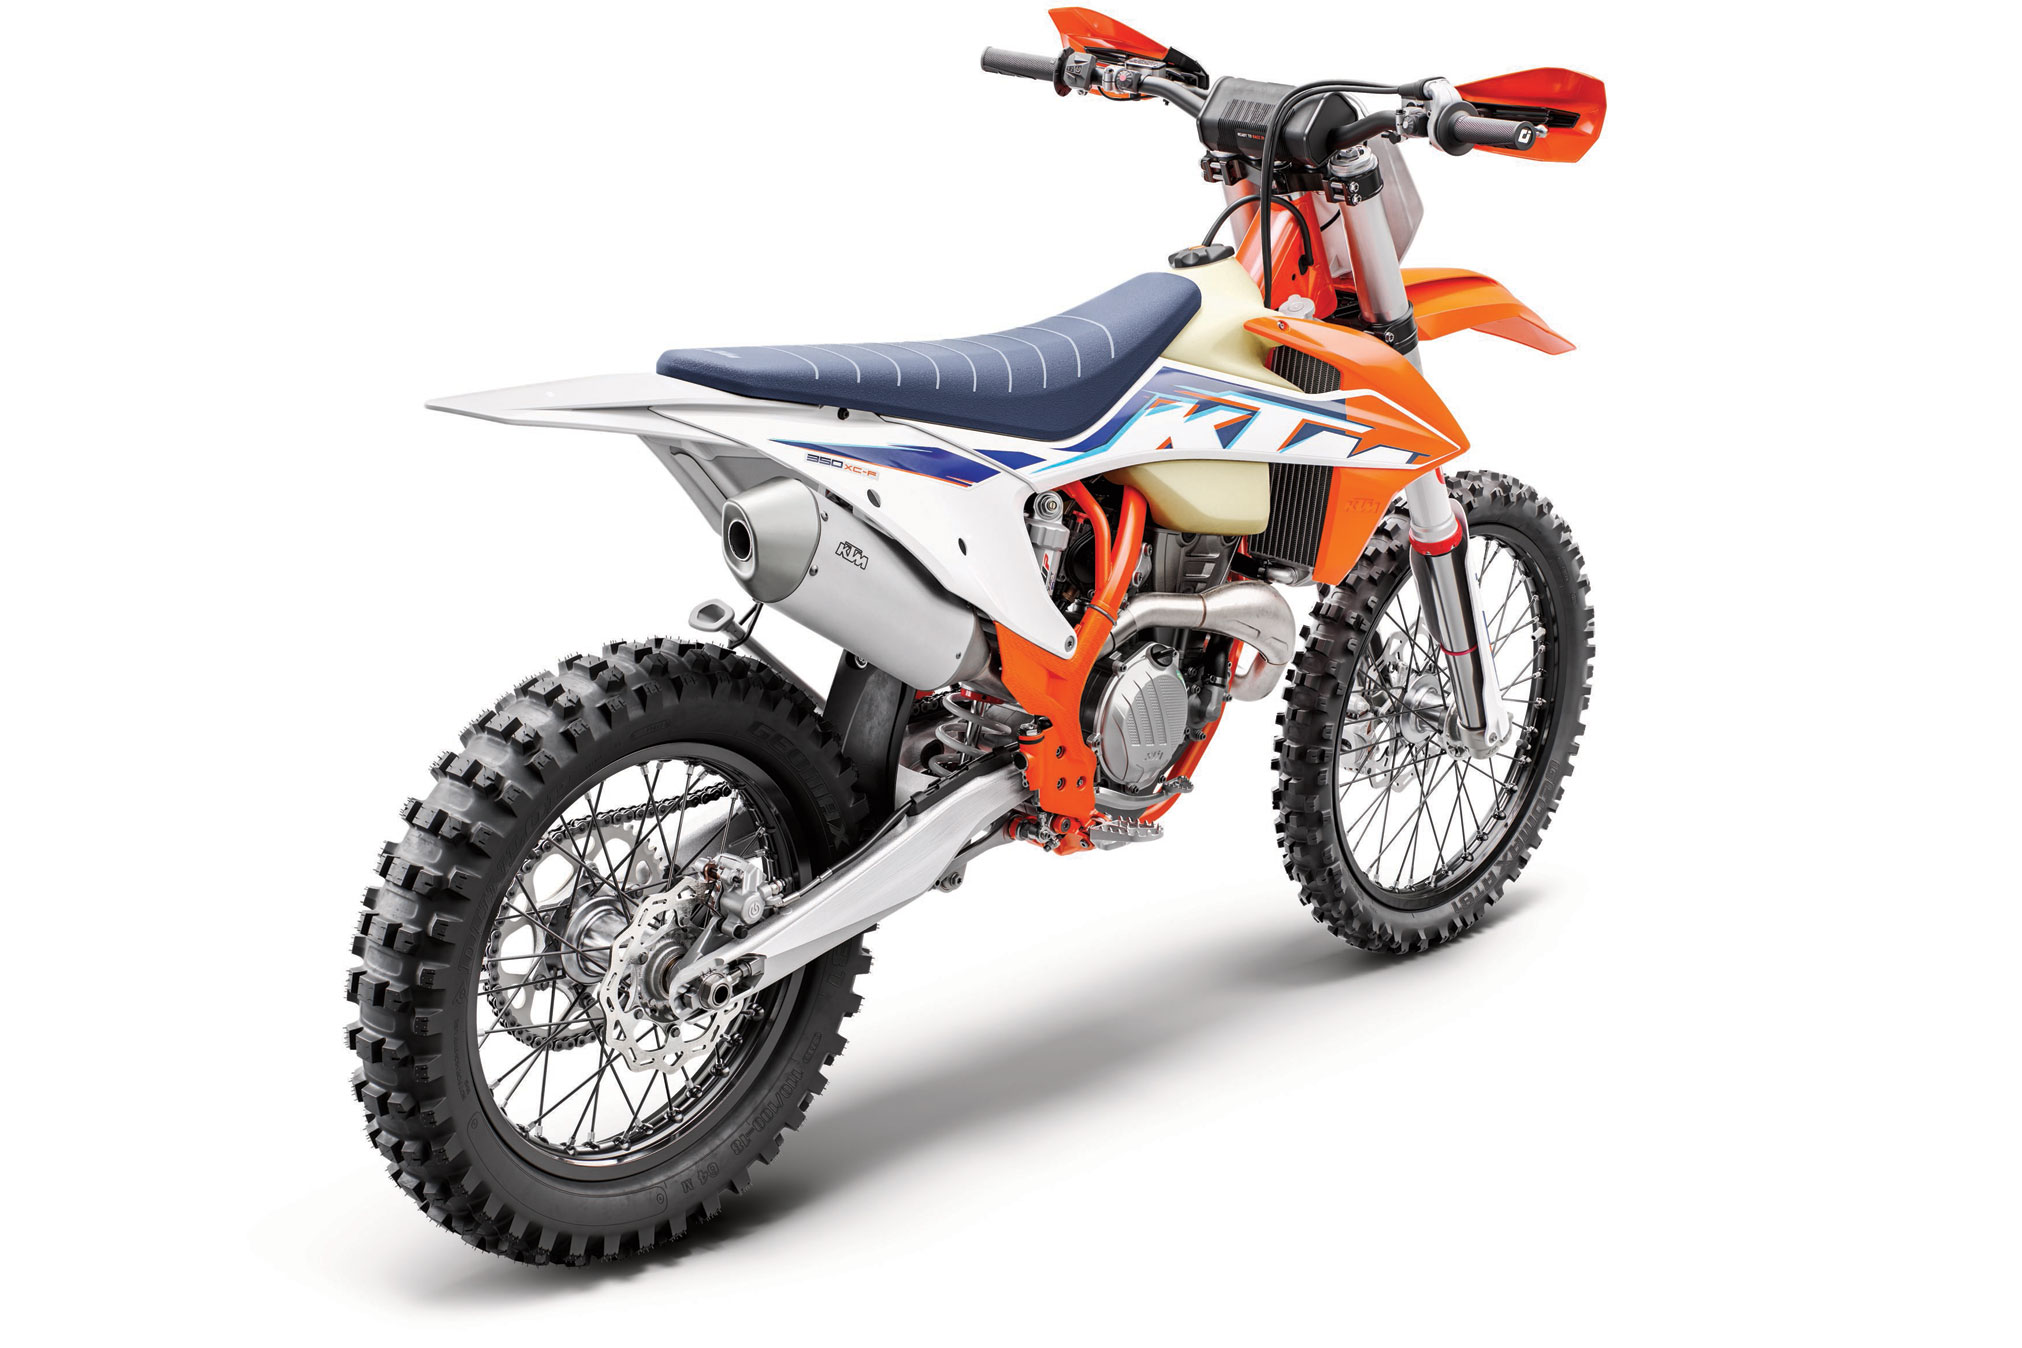 2022 KTM 350 XC-F Guide • Total Motorcycle